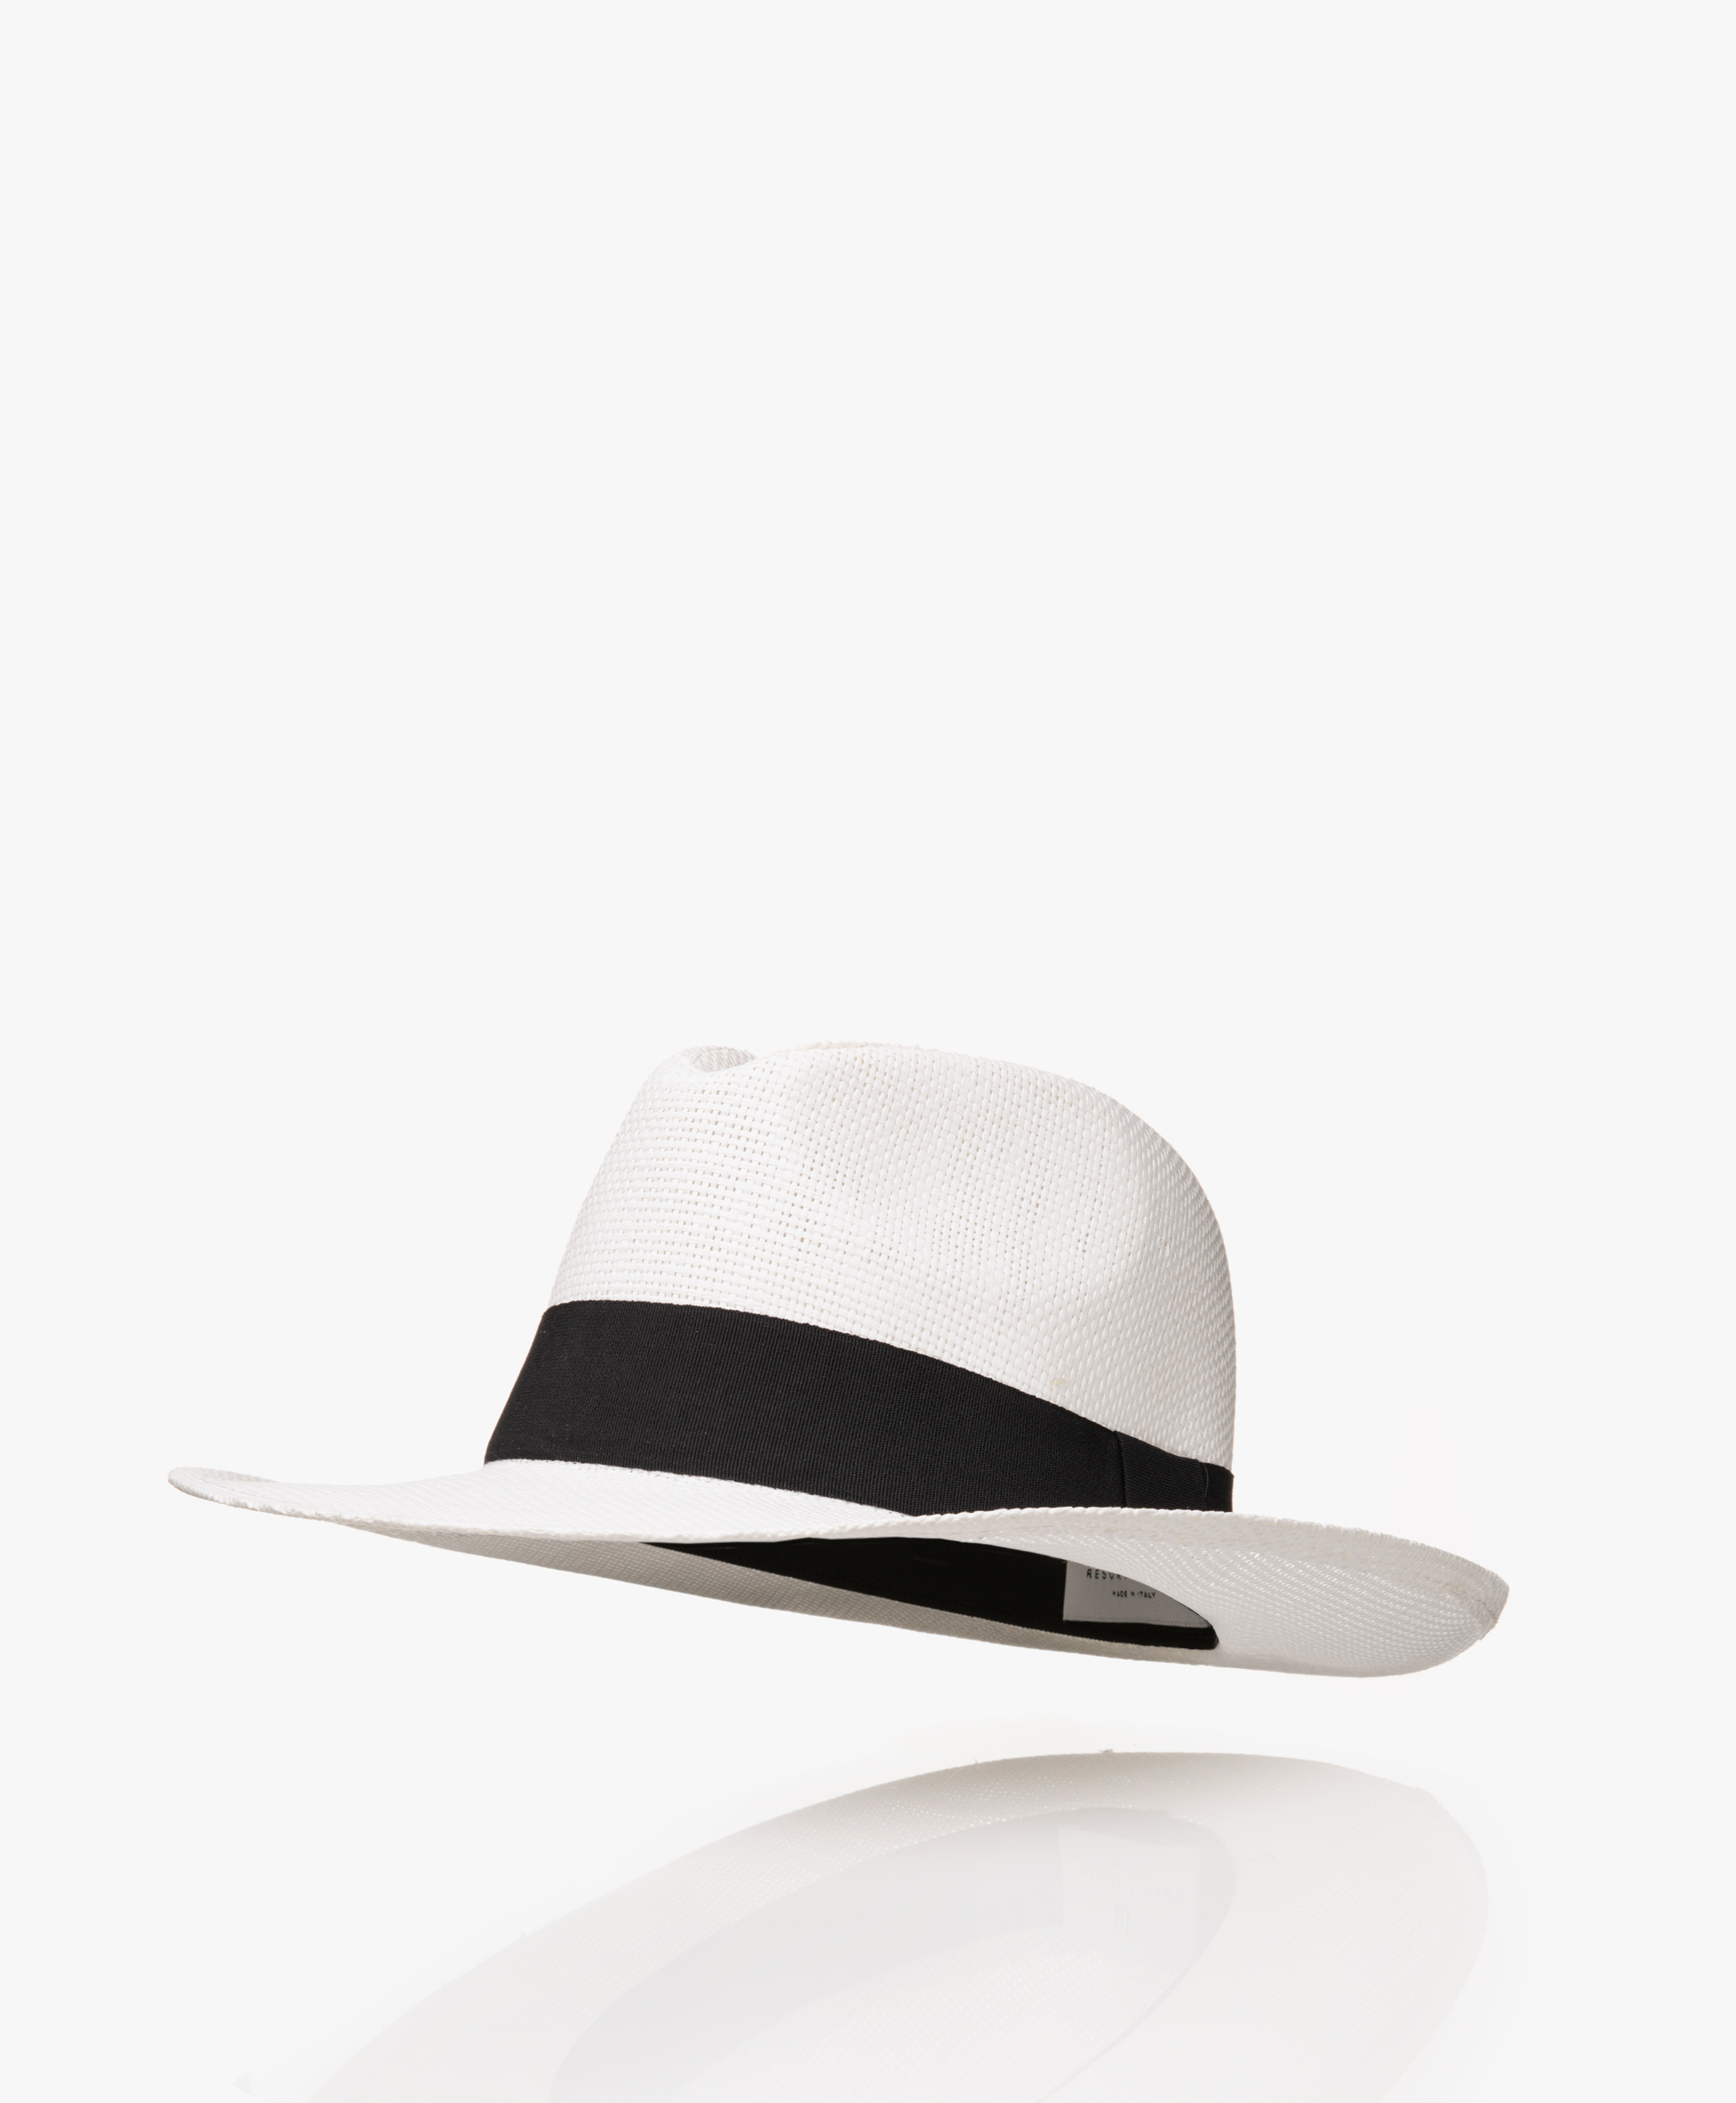 Woven Straw Style Summer Trilby Hat